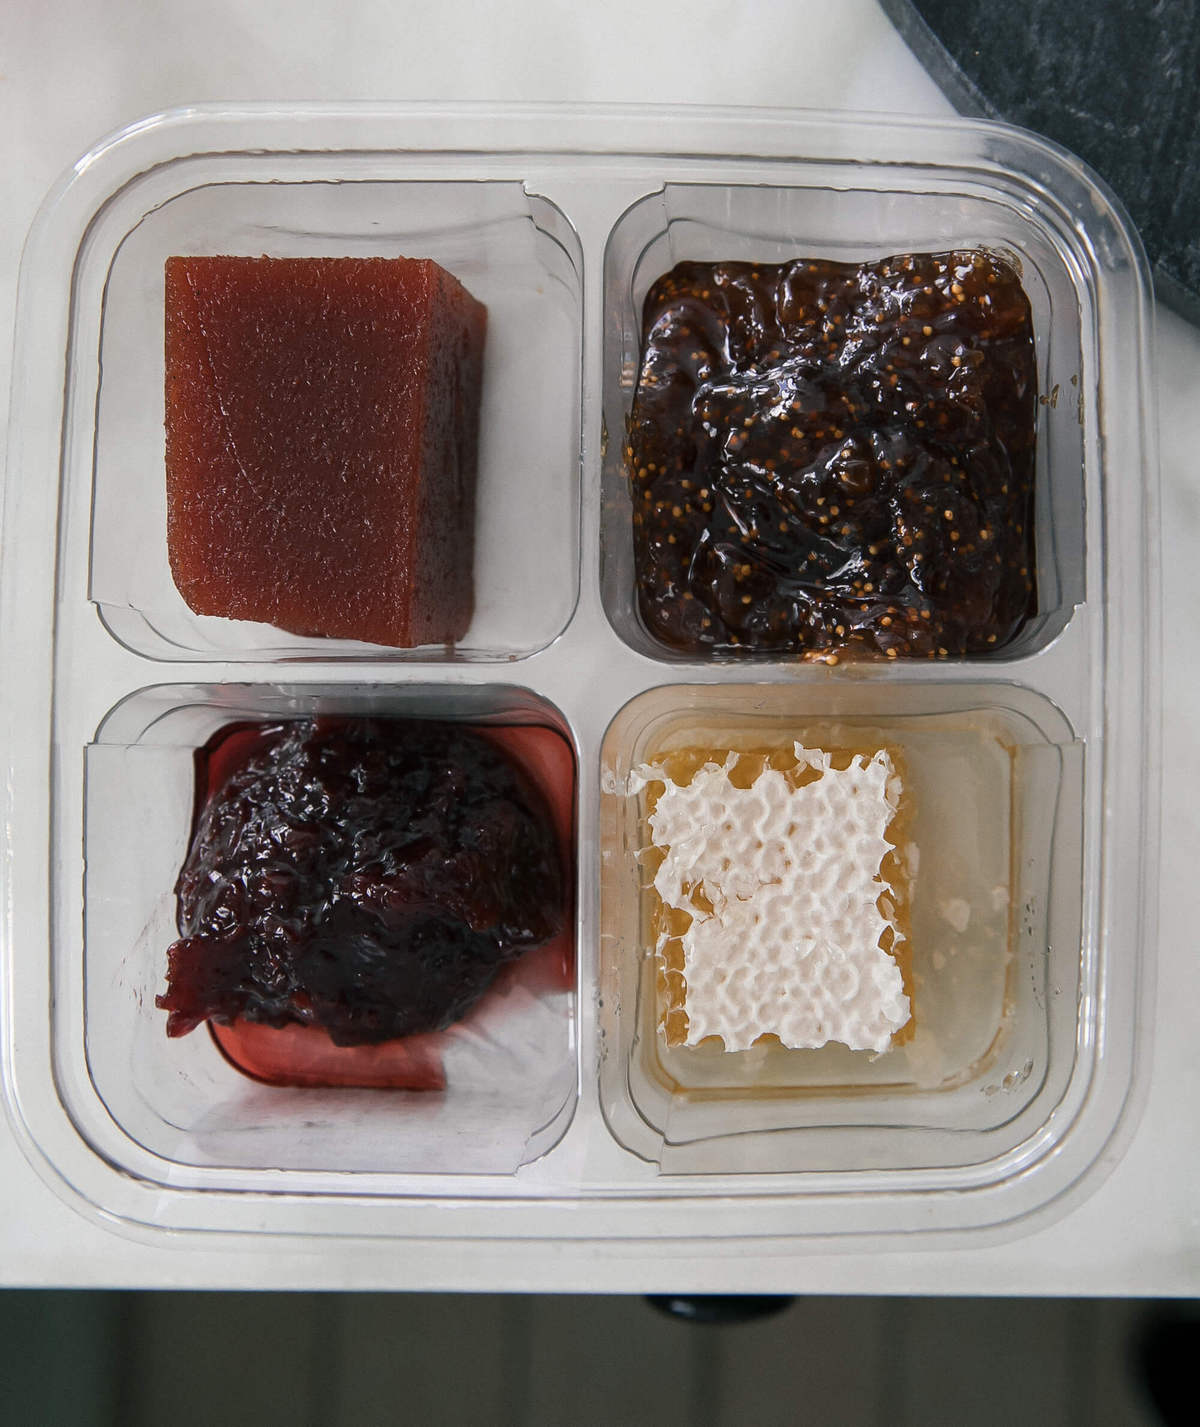 Honey and jam in a container. 